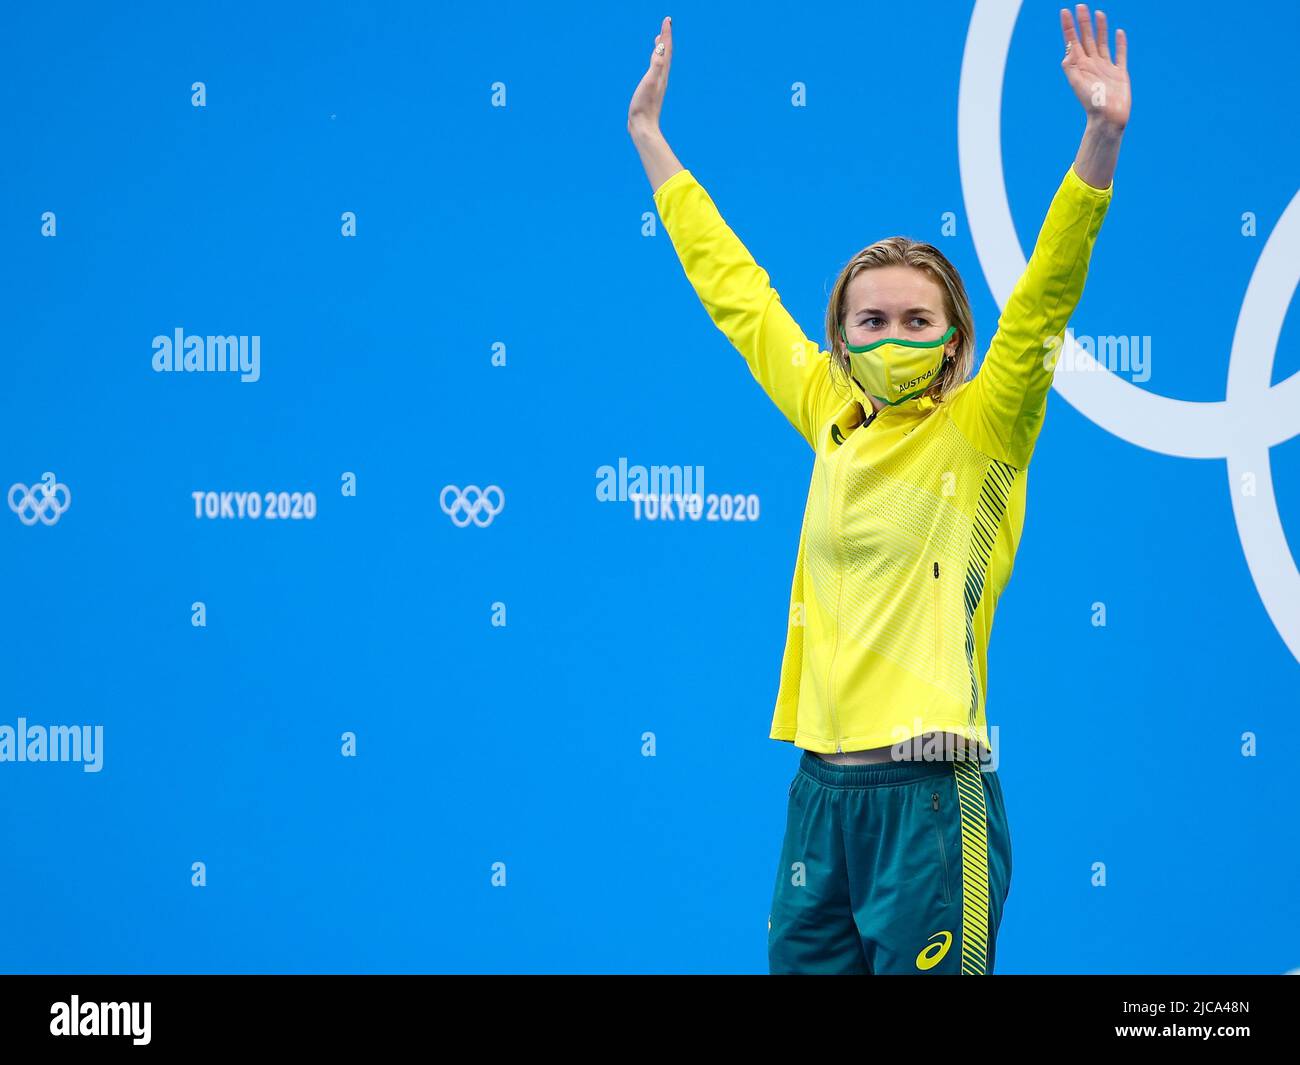 JULY 28th, 2021 - TOKYO, JAPAN: Ariarne Titmus of Australia wins the Gold Medal and breaks the Olympic Record in 1:53.50 in the Women's 200m Freestyle Stock Photo